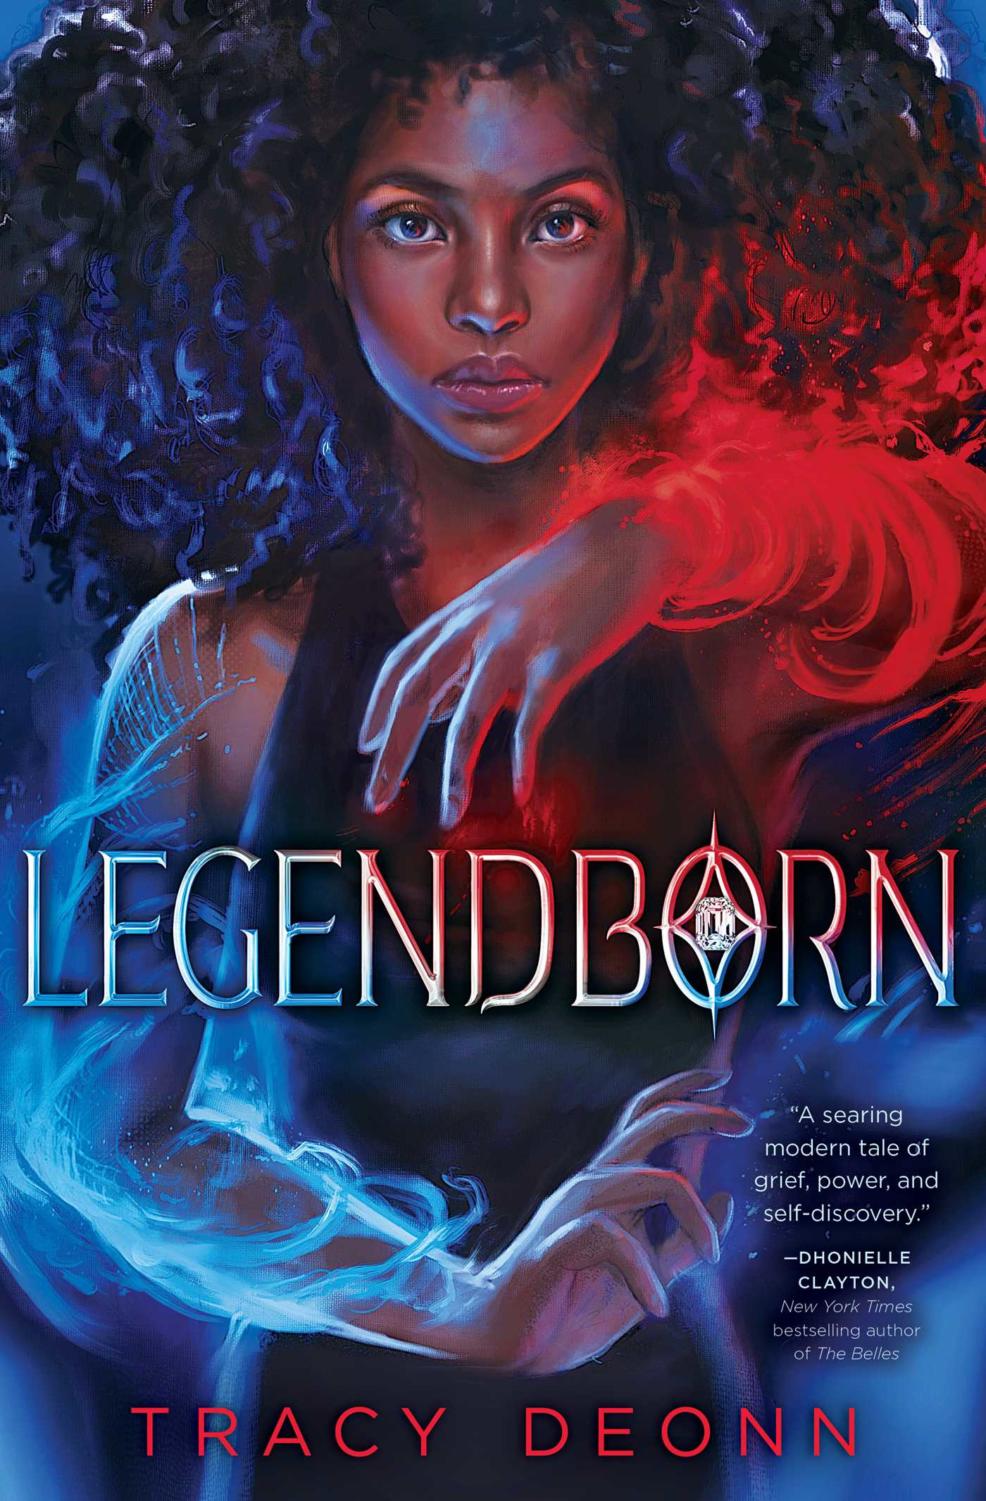 The cover of Tracy Deonns Legendborn.